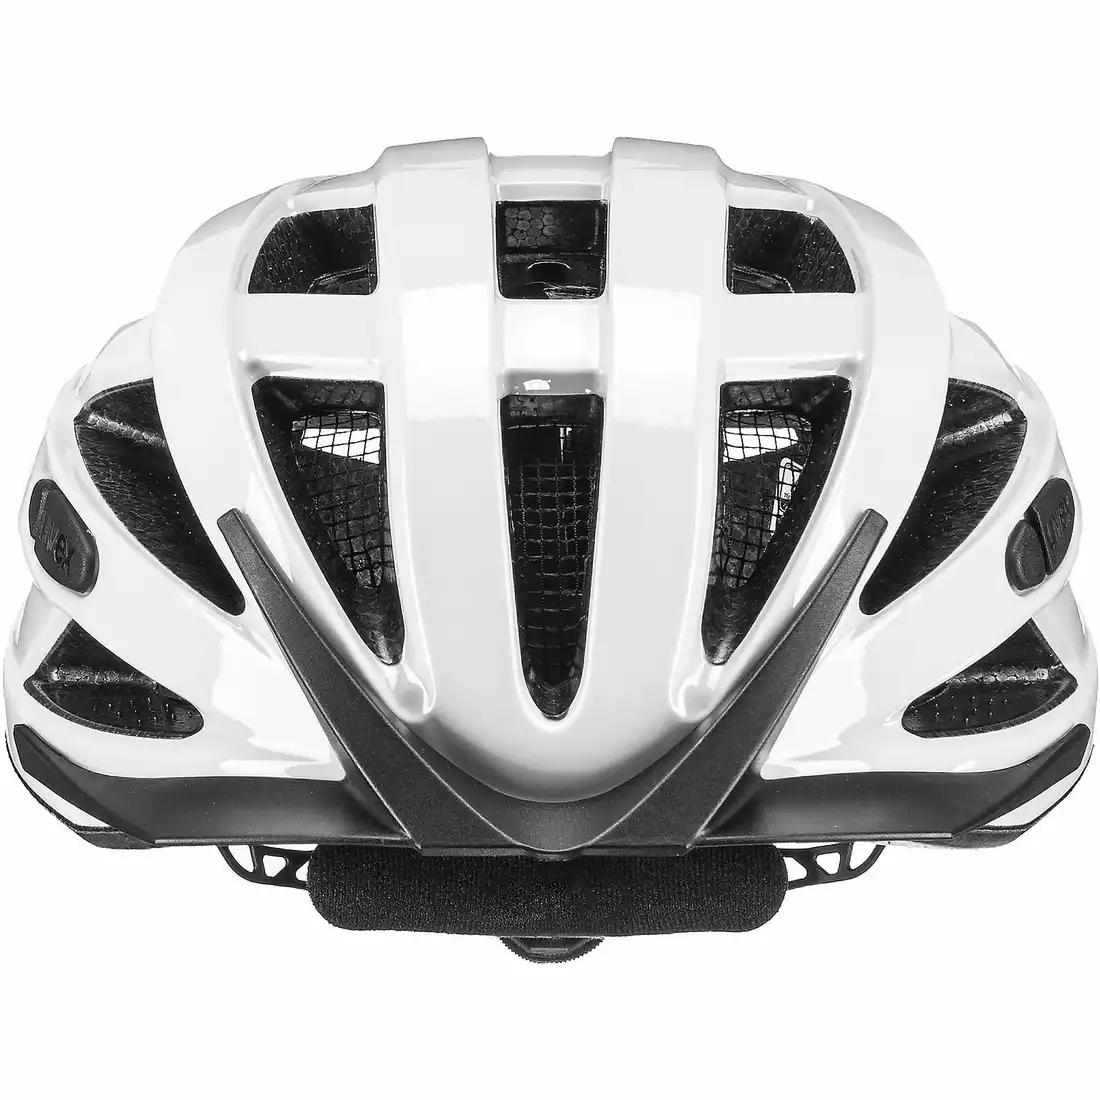 Kask rowerowy UVEX SS21 i-vo 3D 41/0/429/01/15 white 52-57